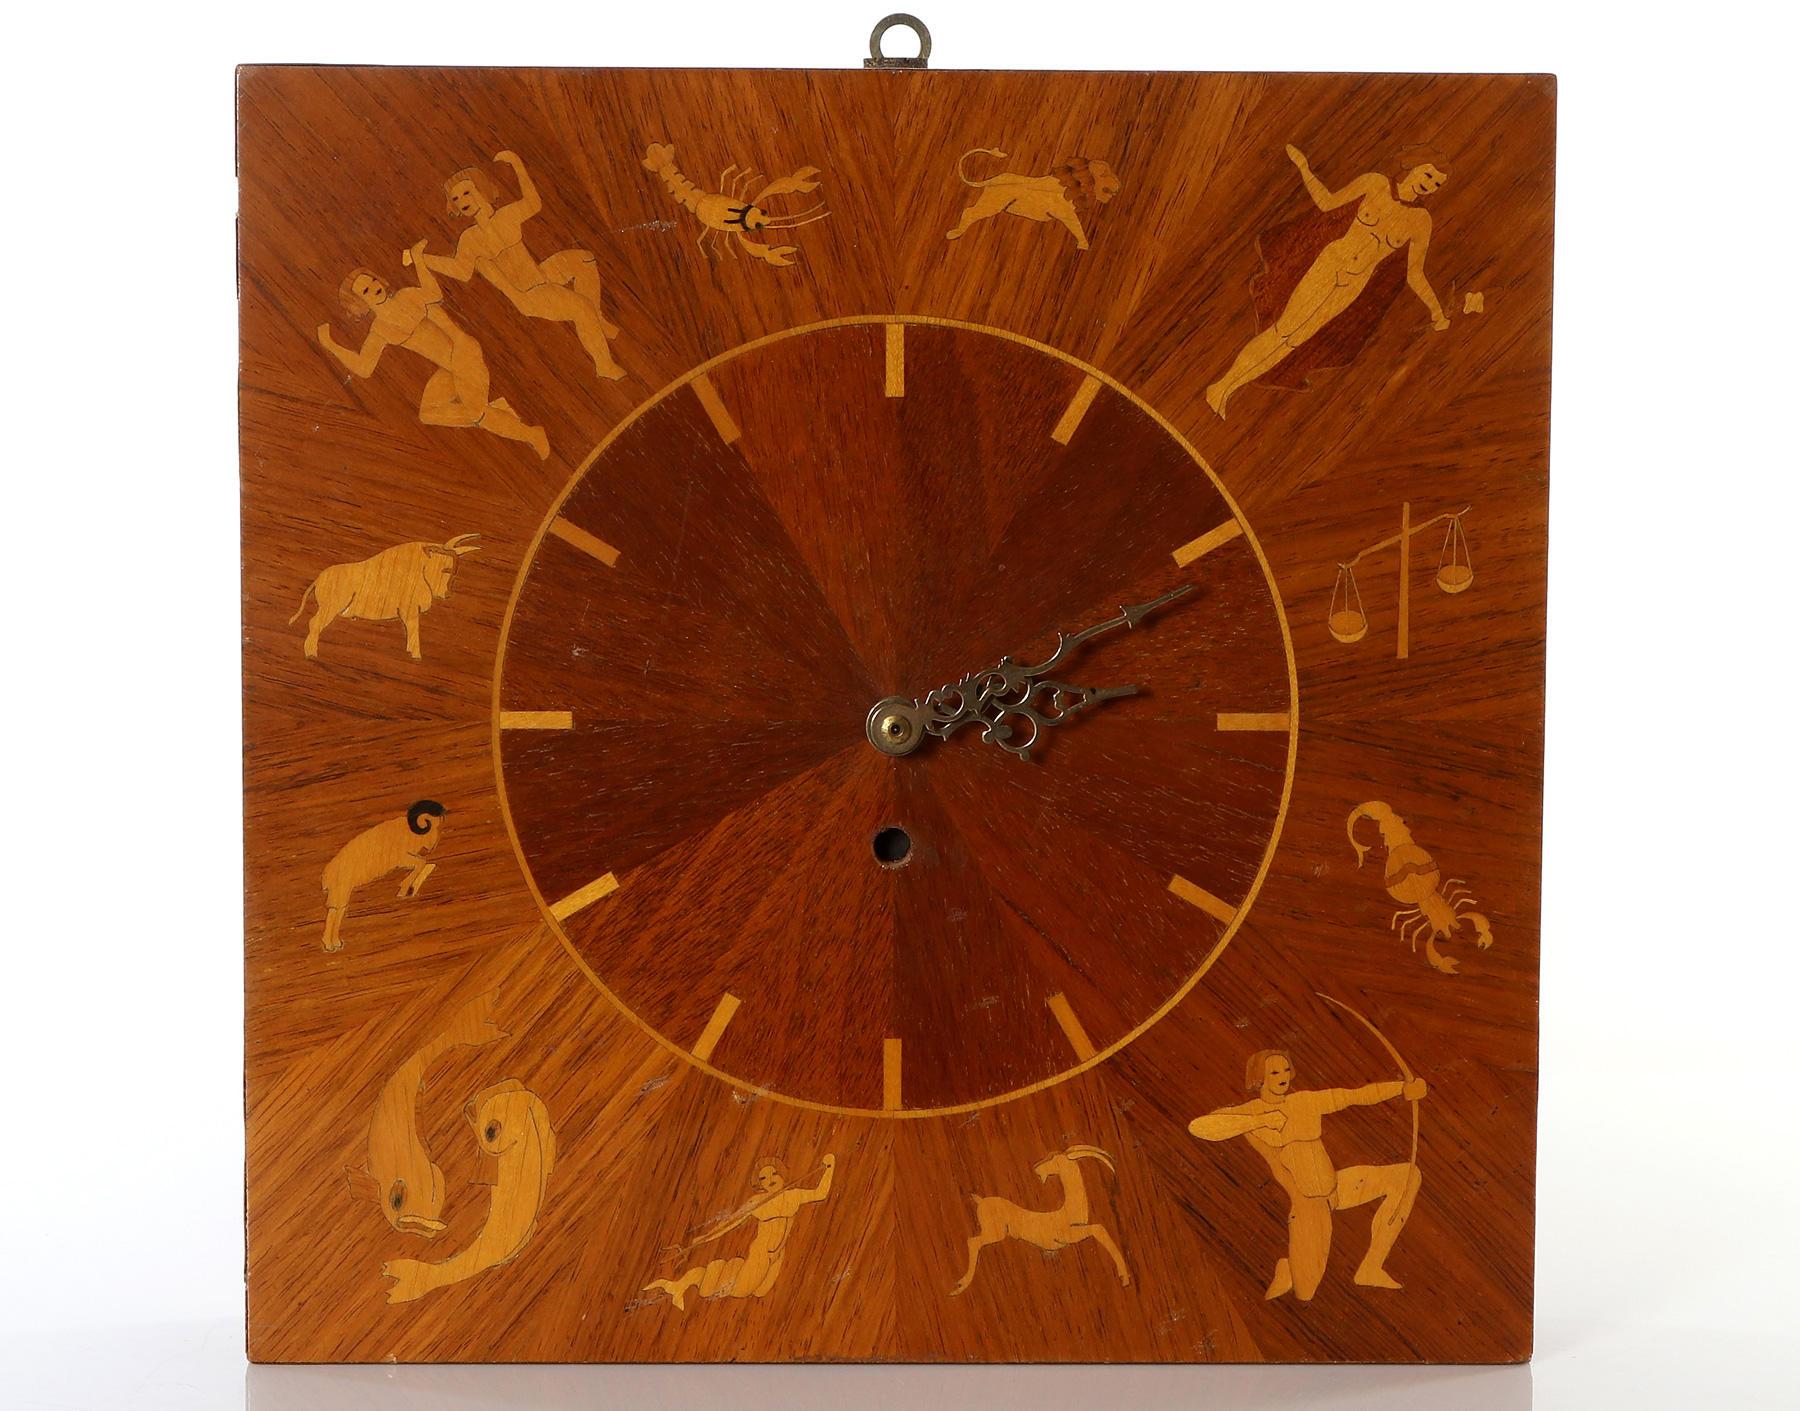 Art Deco Wall Clock Attributed to Mjolby Intarsia from the Late 1930s